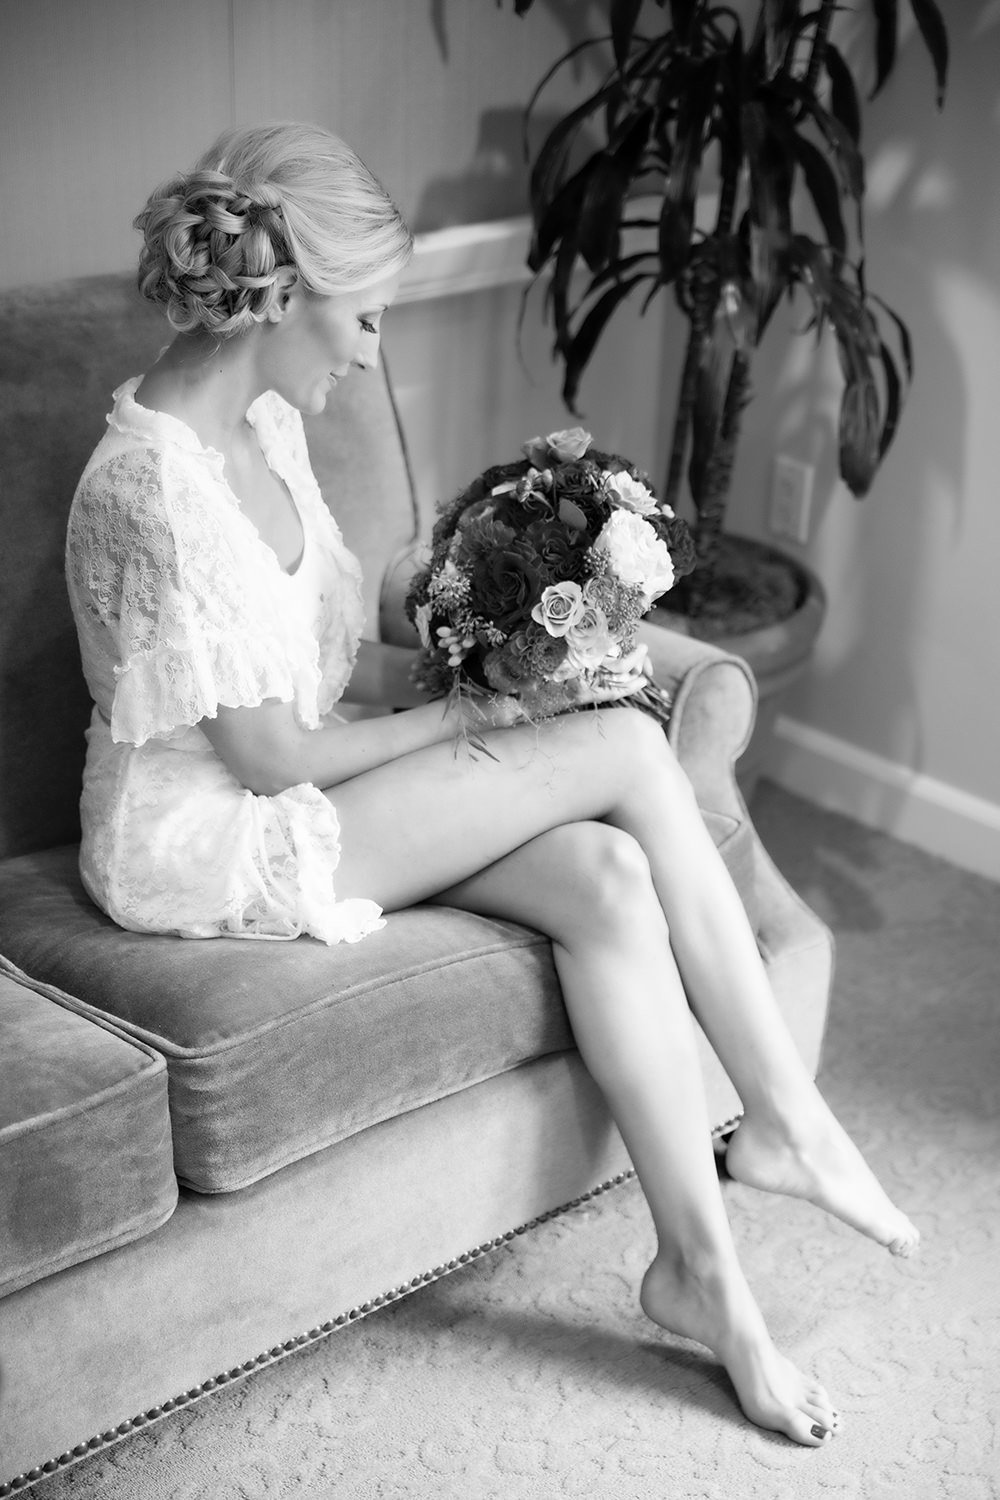 Elegant moment captured in black and white of a bride getting ready